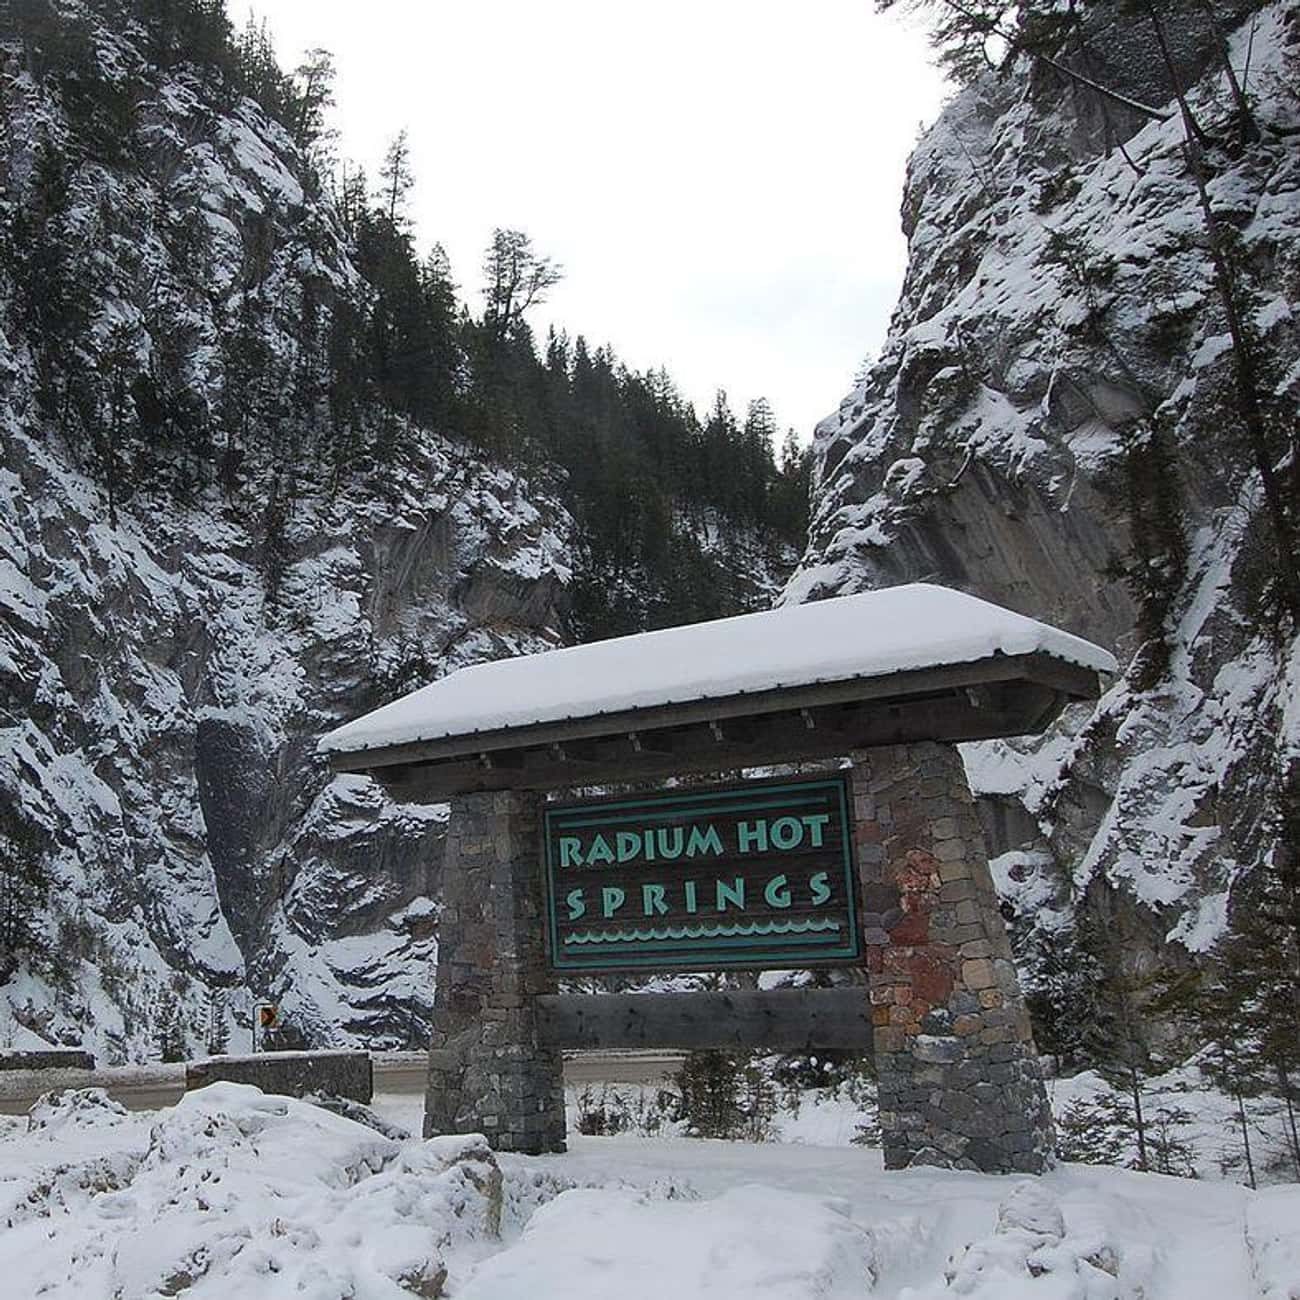 People Submerged Themselves In Radium-Laced Water At Spas